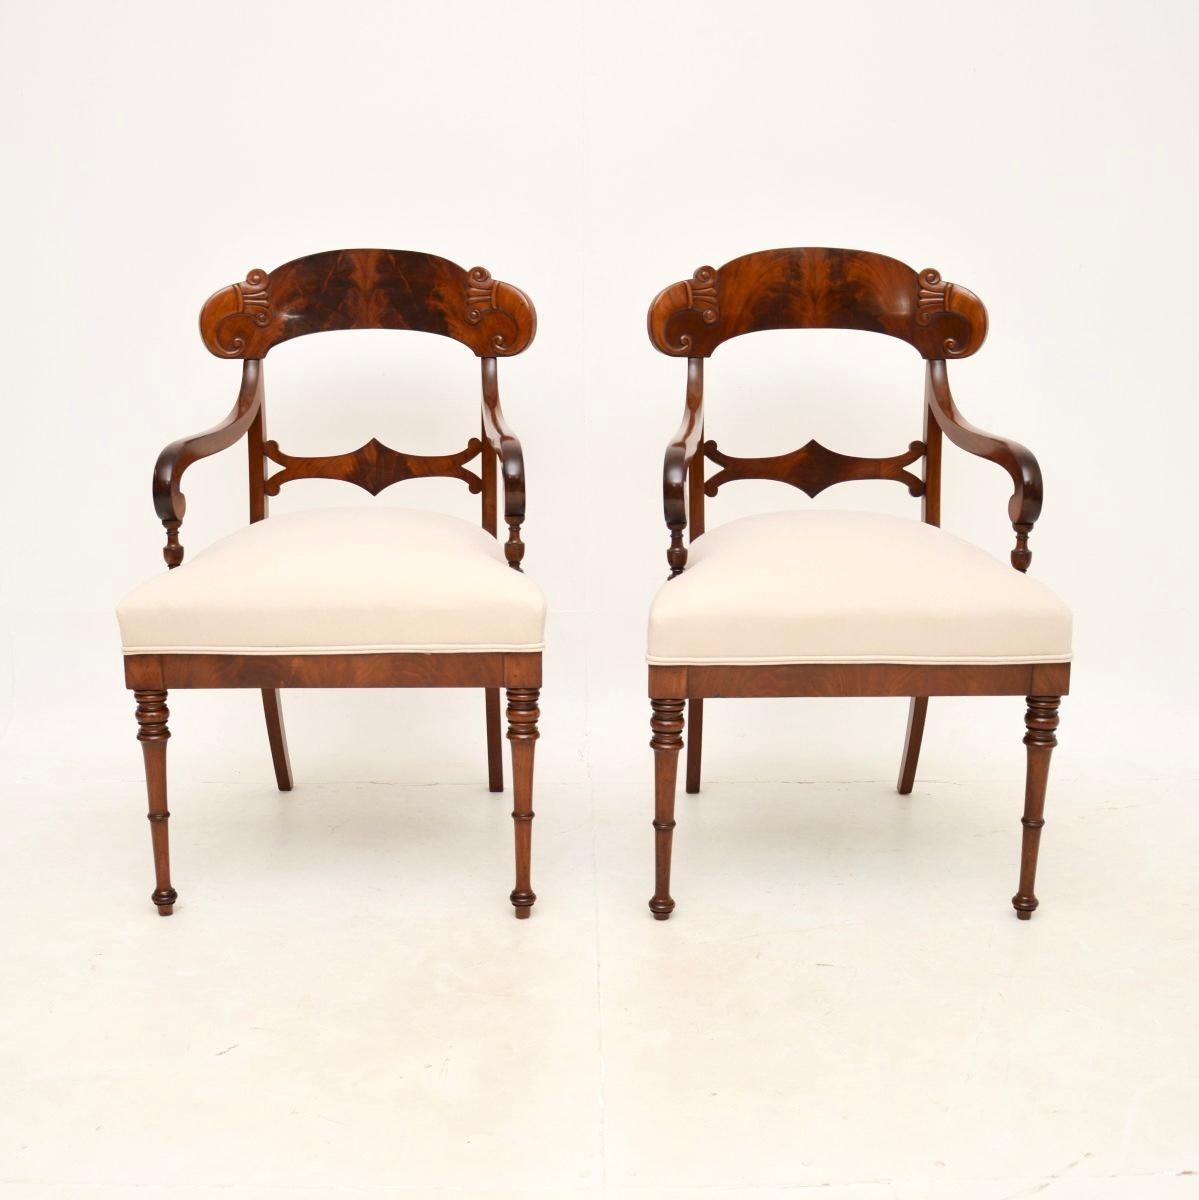 A stunning pair of antique Swedish armchairs. They were recently imported from Sweden, they date from around the 1850-1870 period.

They are of extremely fine quality, with beautifully carved details, finely turned legs and gorgeous flame grain